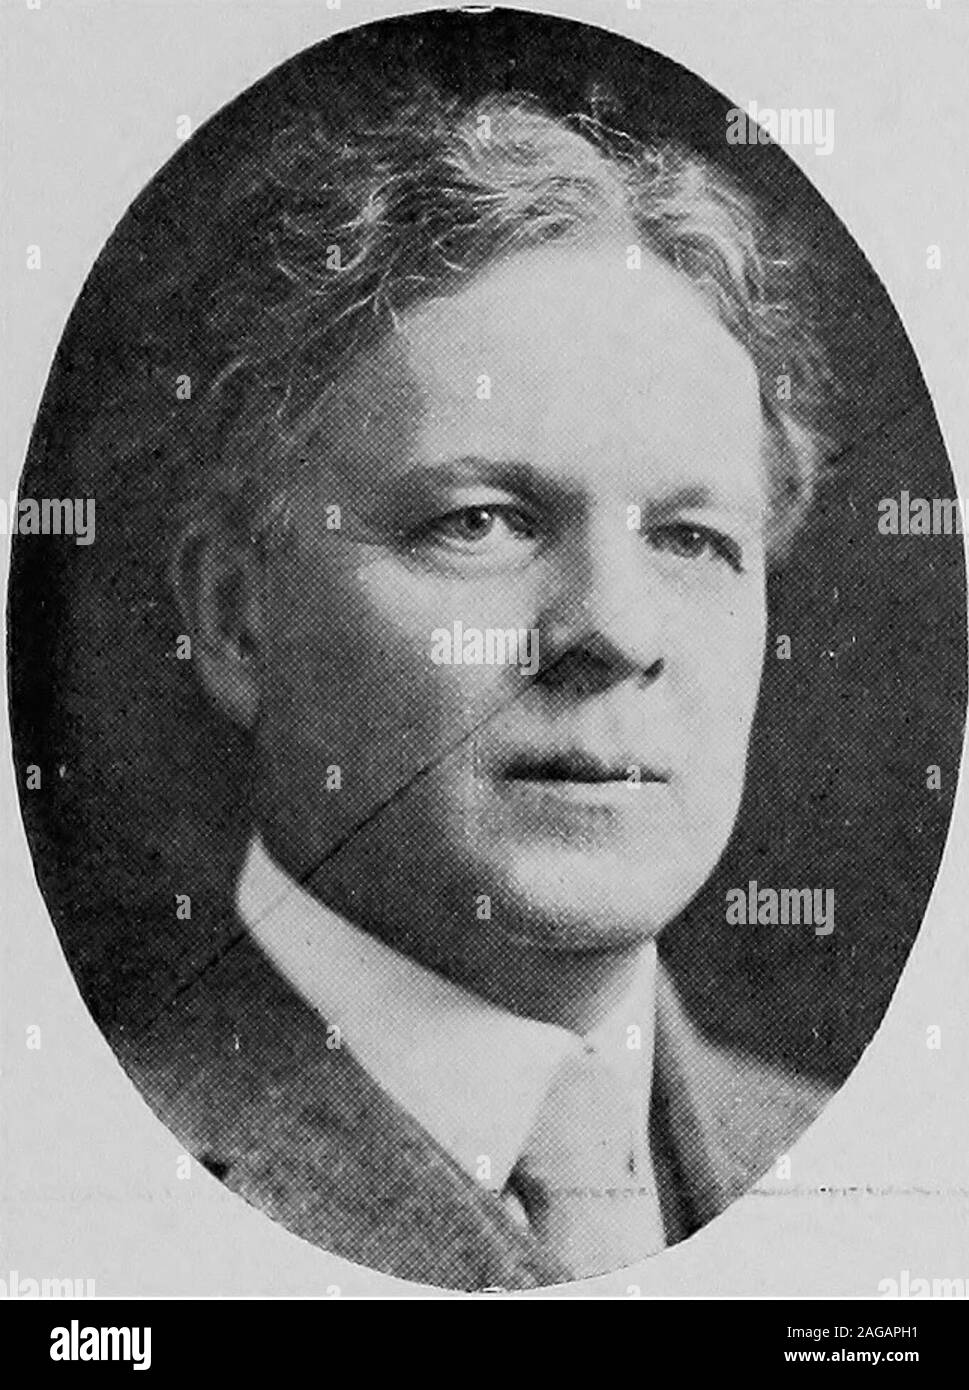 . Empire state notables, 1914. THOMAS HERNARD JOSEPH CONNERYEditor, AuthorNew York City HENRY SHERMAN ADAMSEditor The SpurNew York City Empire State Notablesjournalists, authors, ktc. 647. EDWARD HOWARD GRIGGS, A. M., L. H. D Author and Lecturer New York City Stock Photo